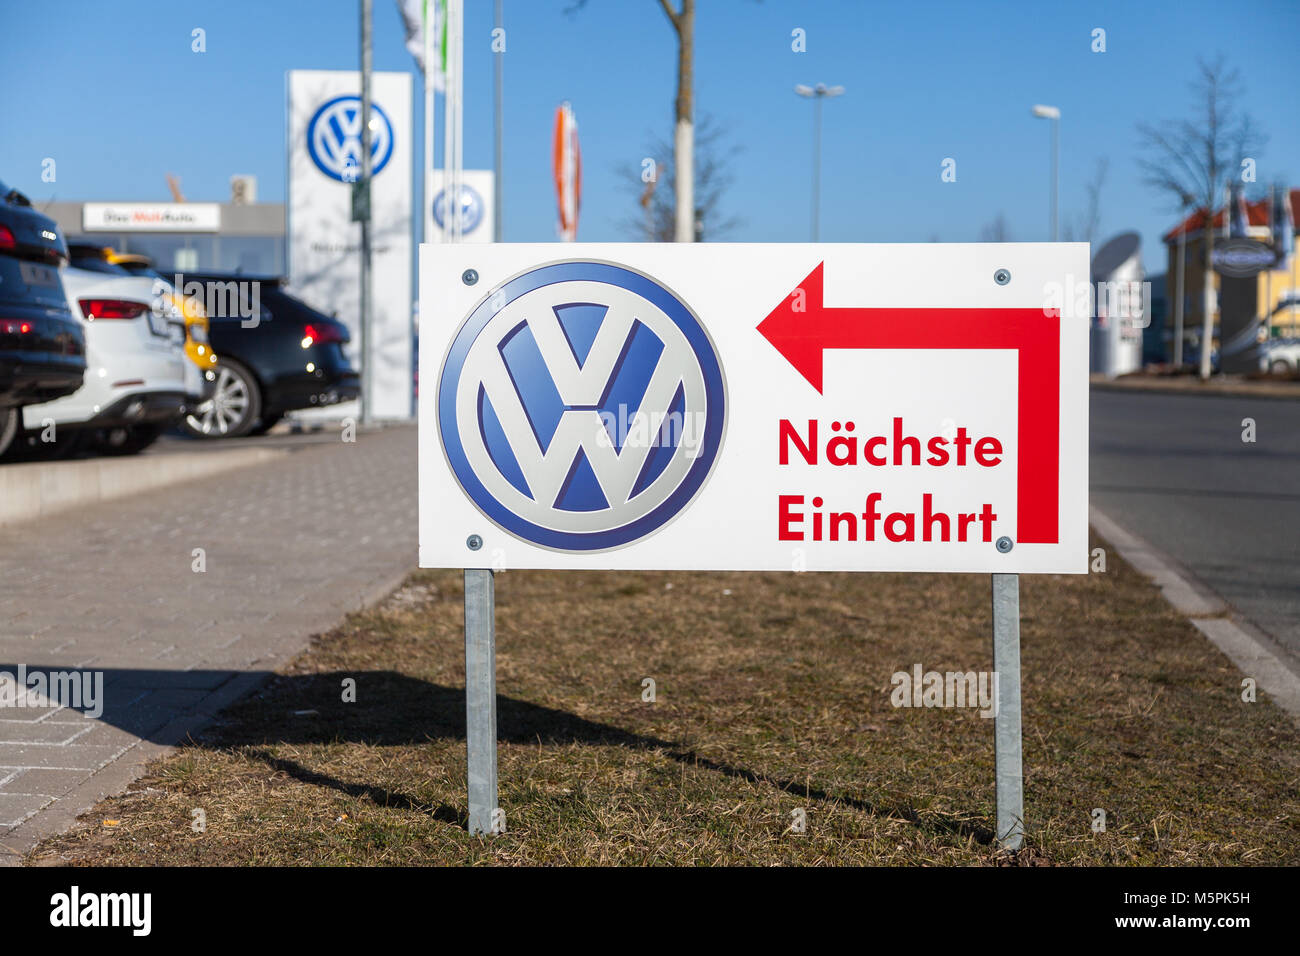 FUERTH / GERMANY - FEBRUARY 25, 2018: Volkswagen logo near a car dealer. Naechste Einfahrt means next entry. Volkswagen is a German automaker founded  Stock Photo